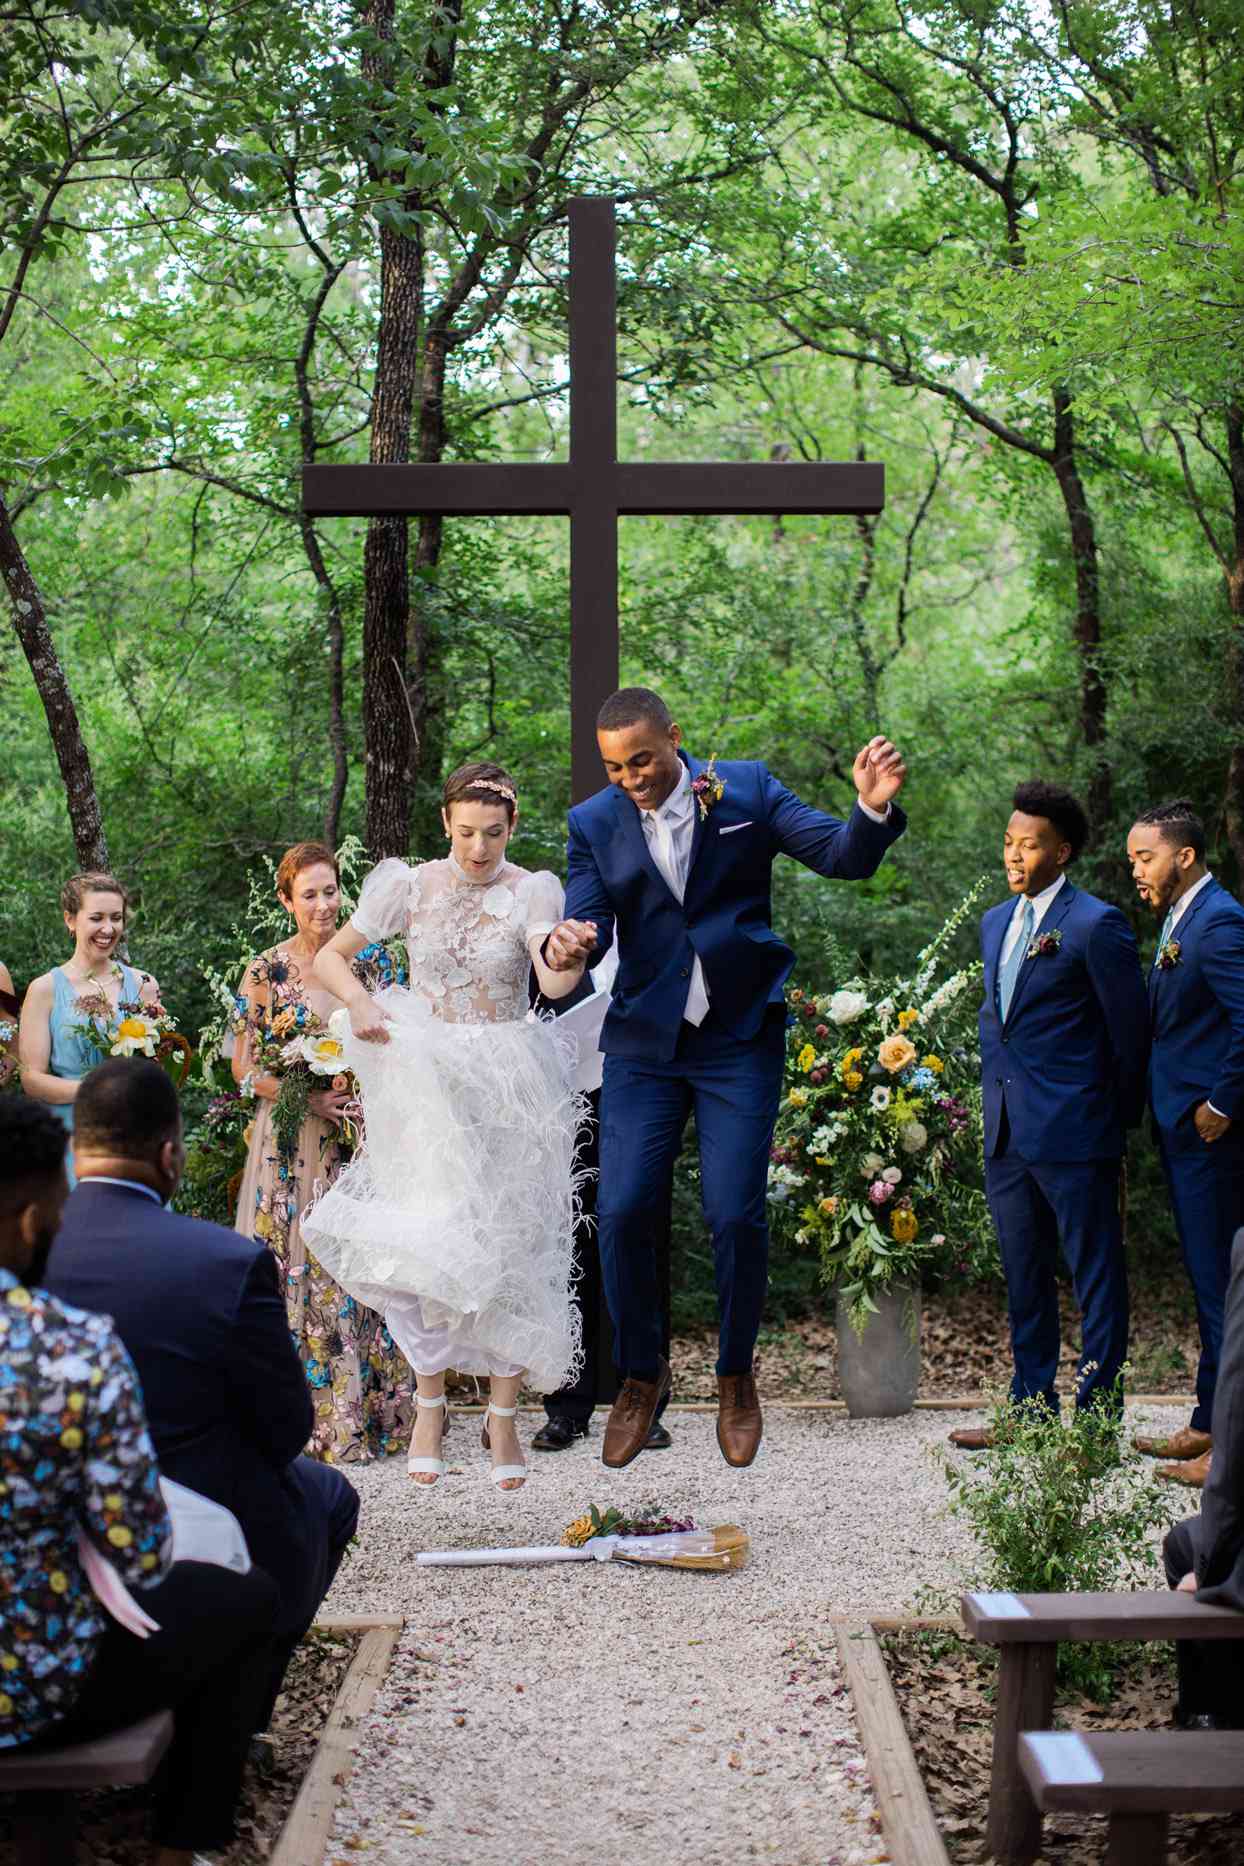 Bride and groom jumping over a broom while wedding party and guests watch